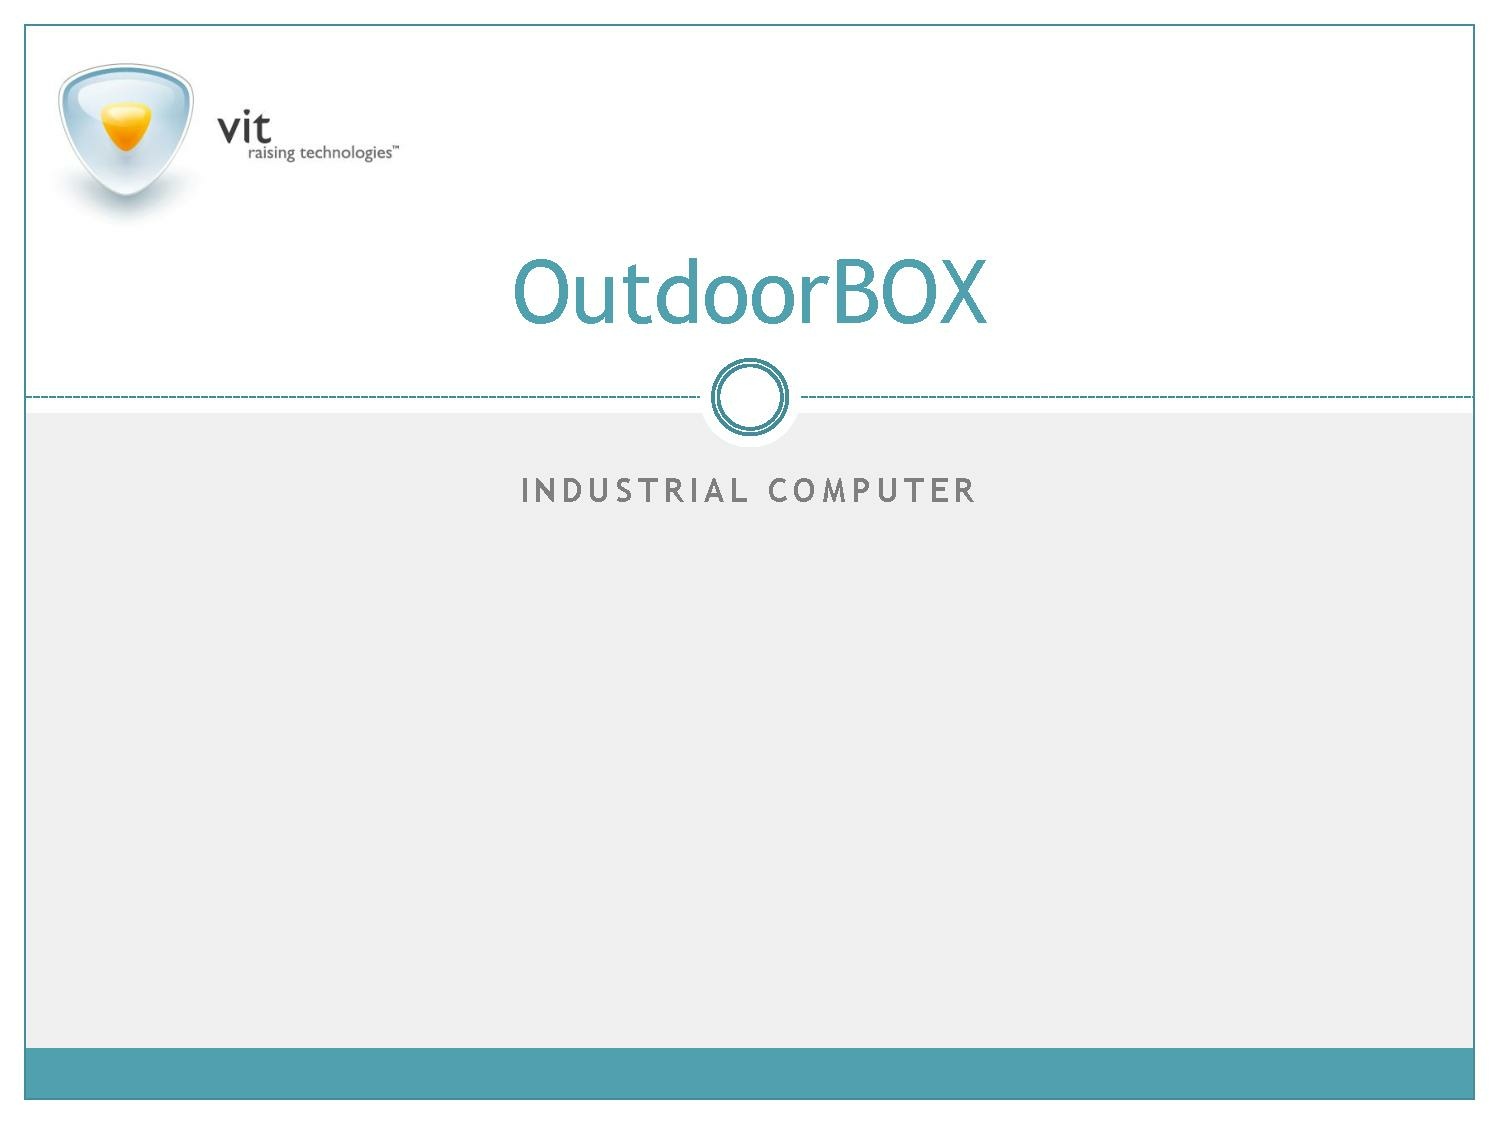 Download information about OutdoorBOX